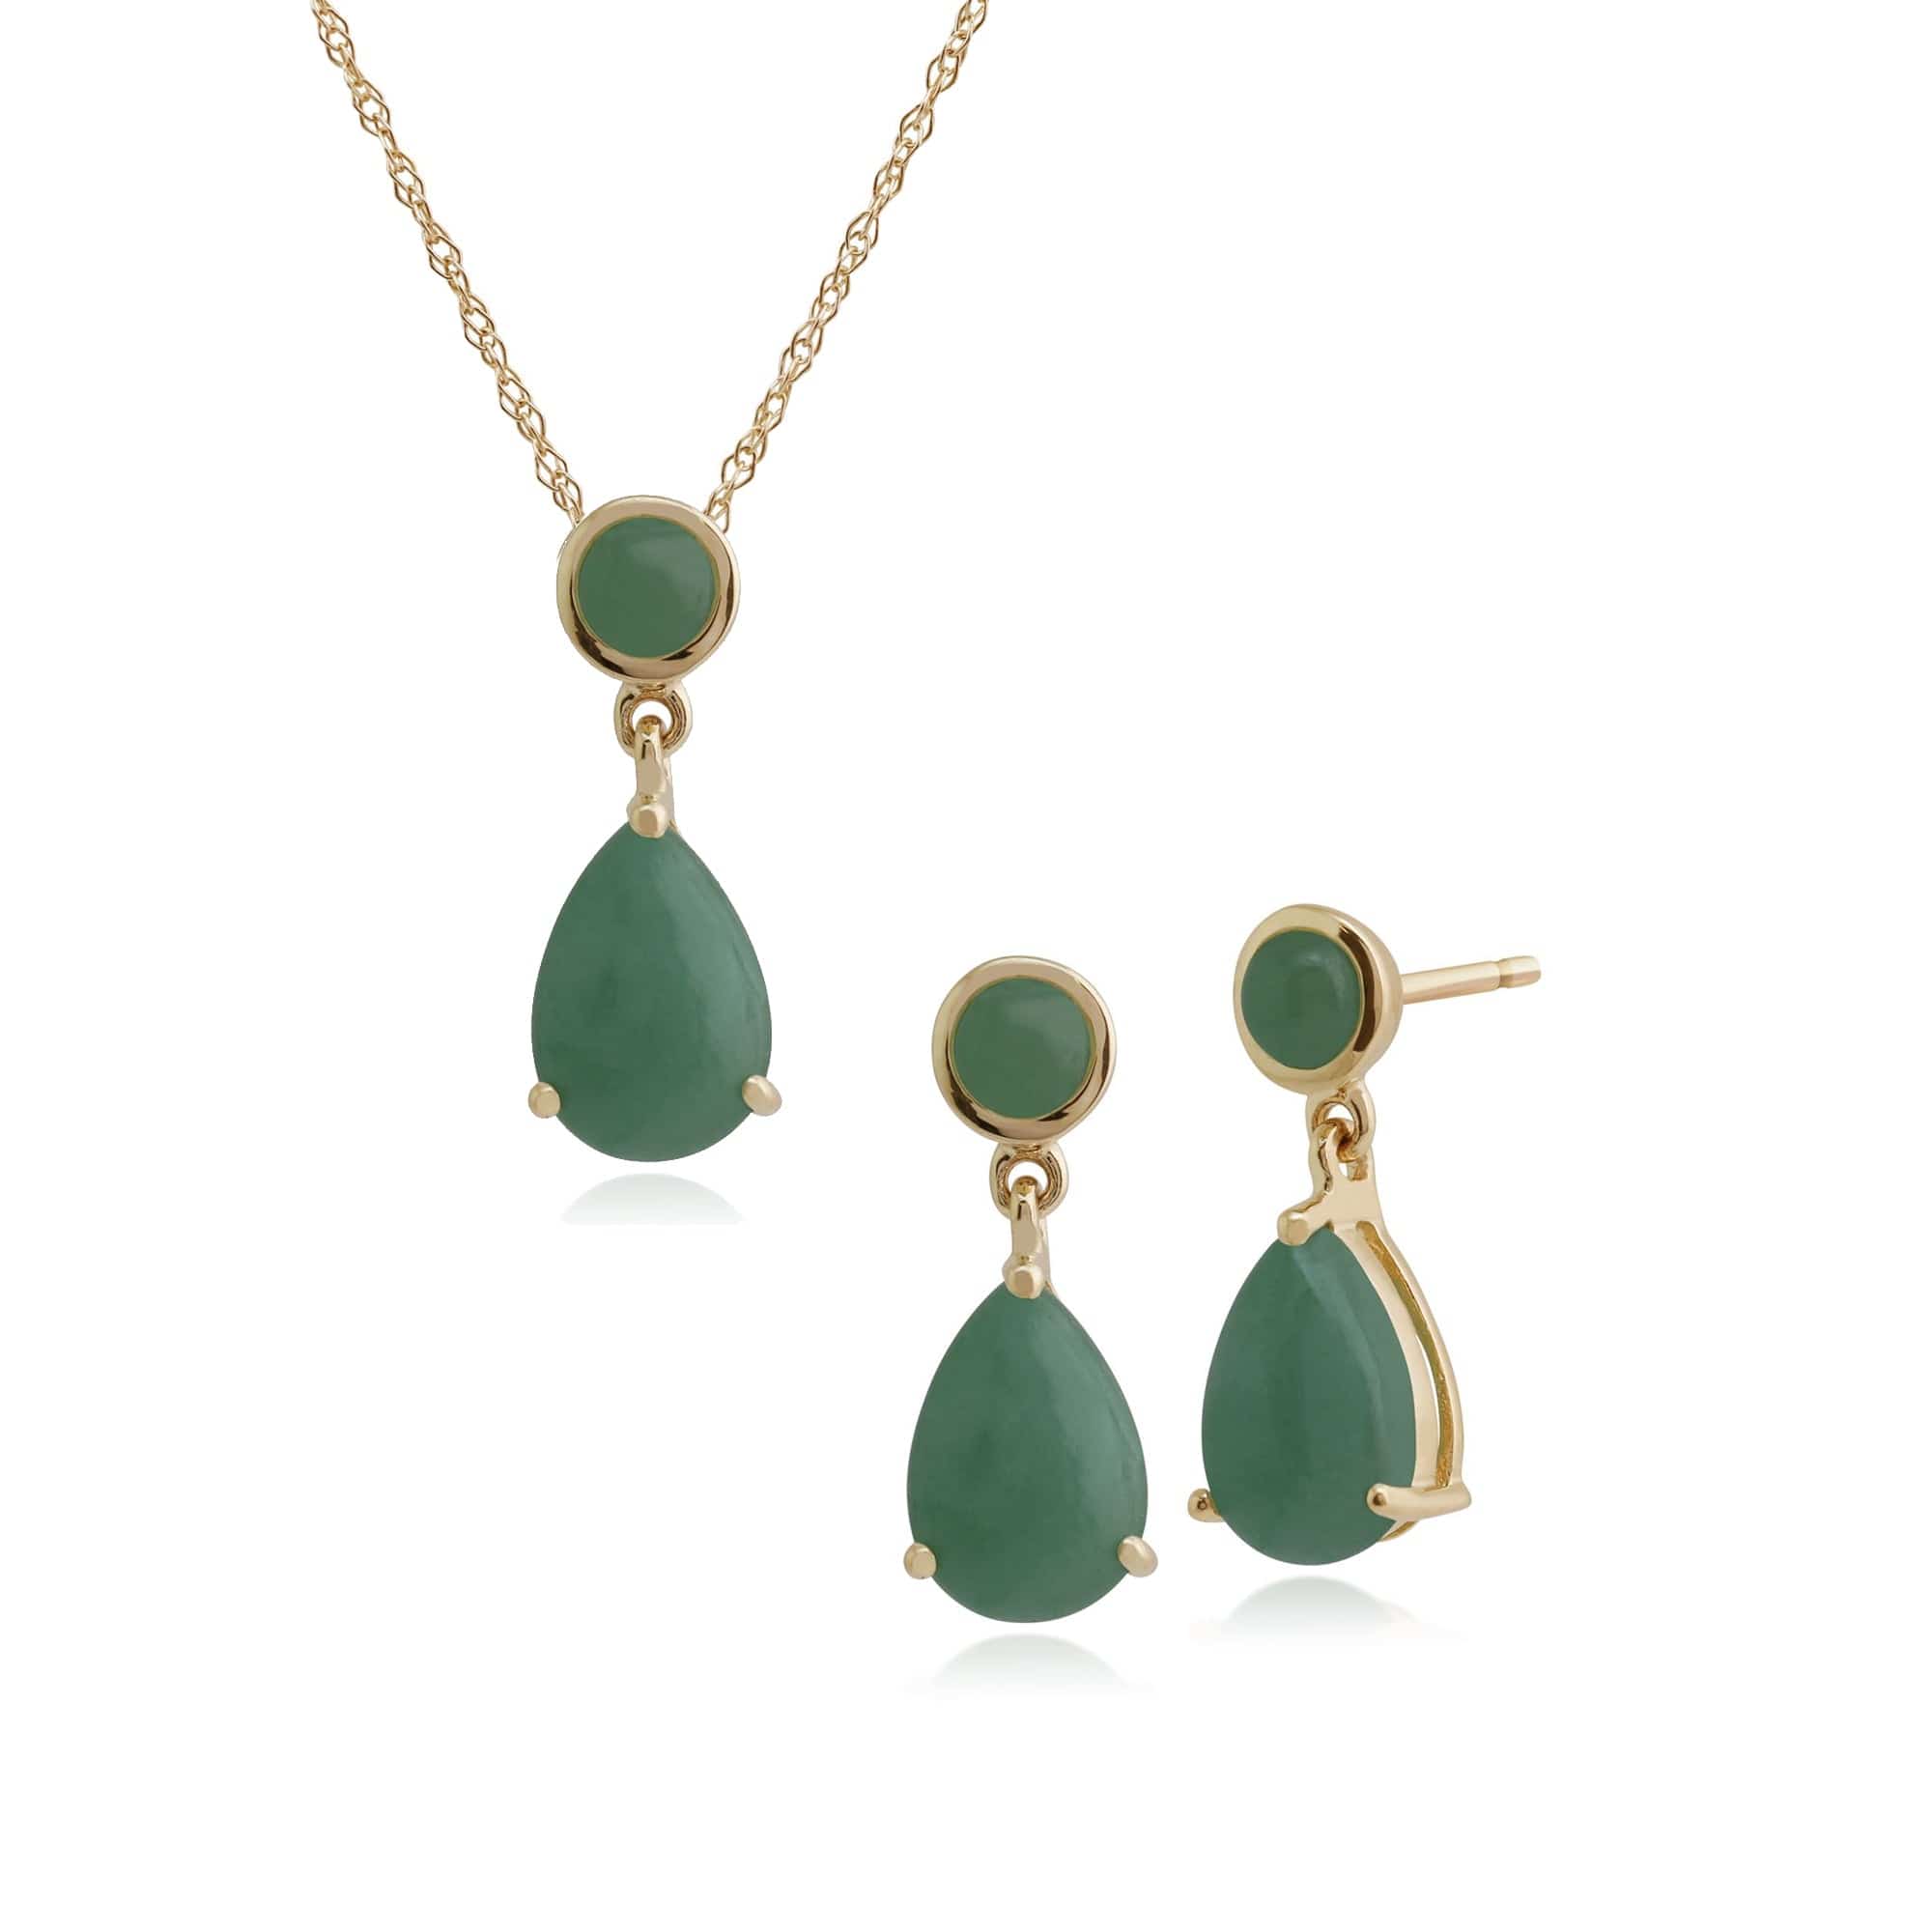 186E0148109-186P0188109 Classic Pear & Round Jade Drop Earrings & Pendant Set in 9ct Gold 1